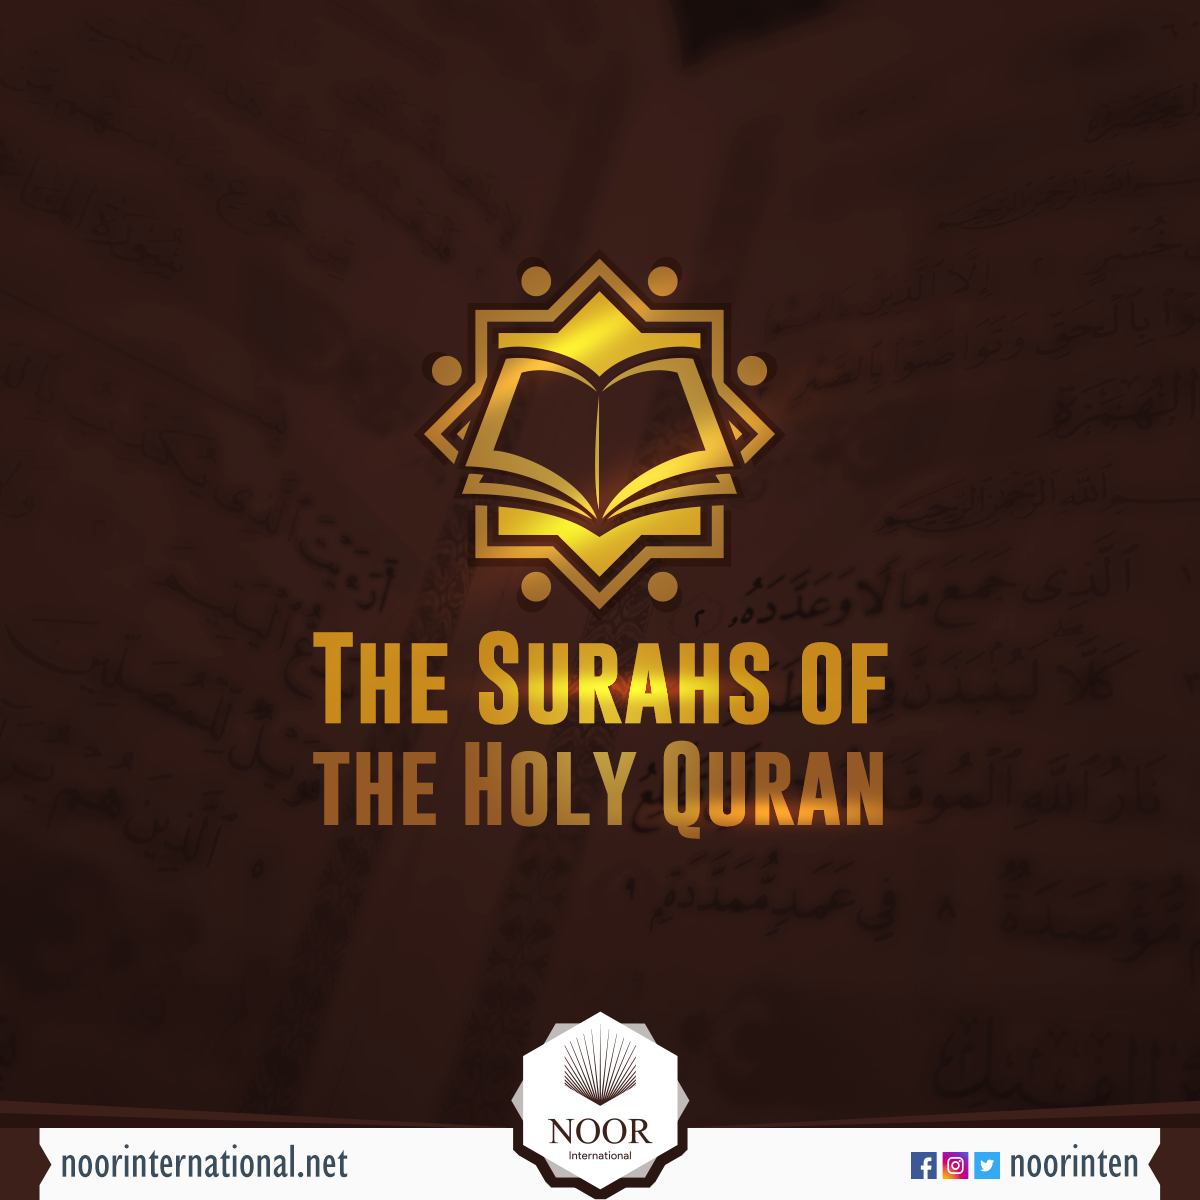 The Surahs of the Holy Quran